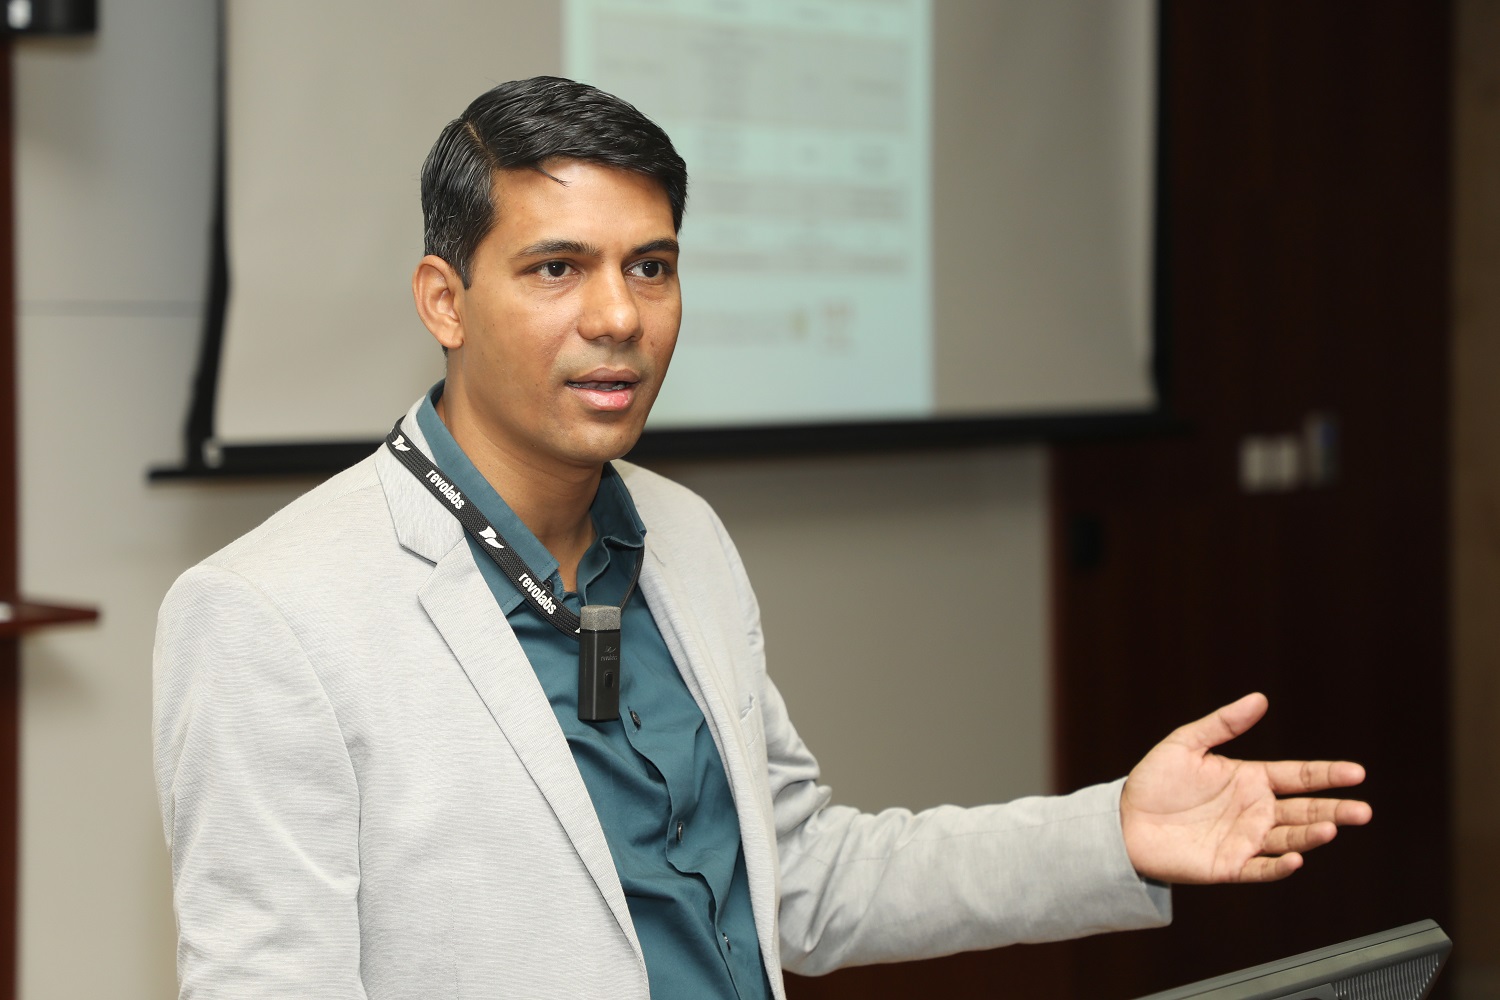 Prof. Jitamitra Desai, Chair, Supply Chain Management Centre (SCMC), IIMB welcomes speakers and participants to the S3 (Supply Chain Startup Solutions) conference, jointly organized by the SCMC and the NSRCEL on February 14, 2020.